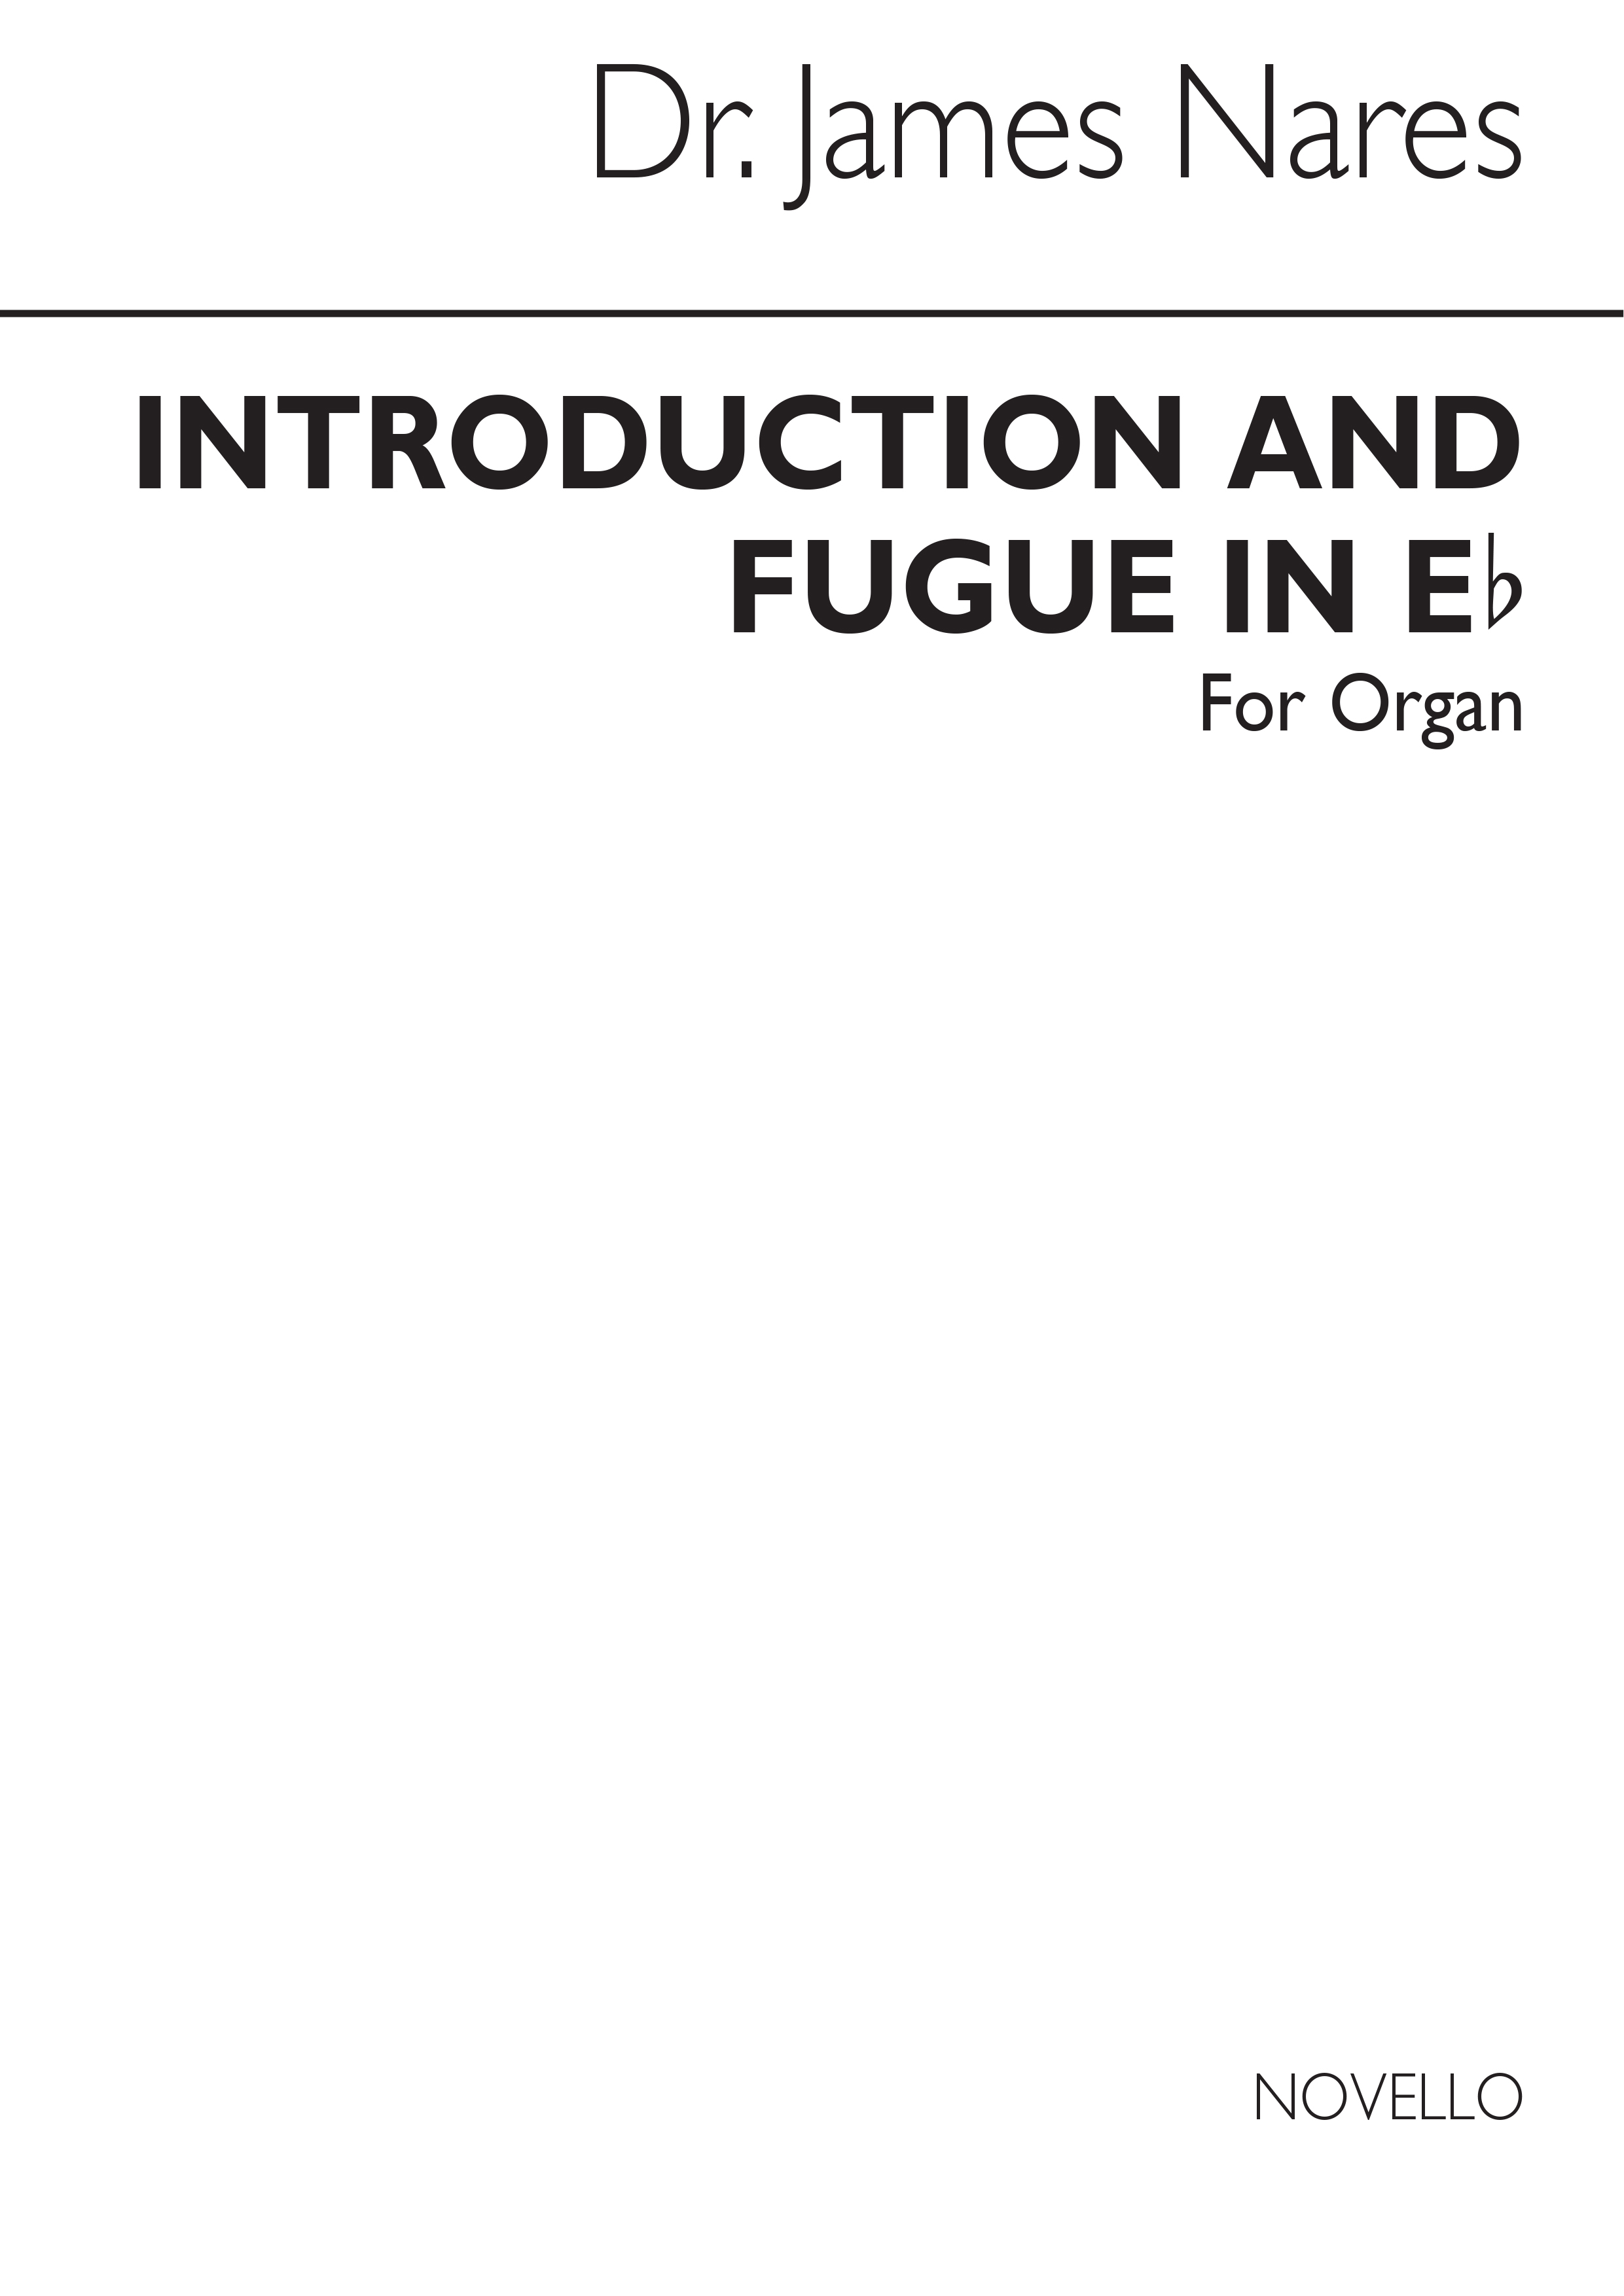 James Nares: Introduction And Fugue In E Flat For Organ